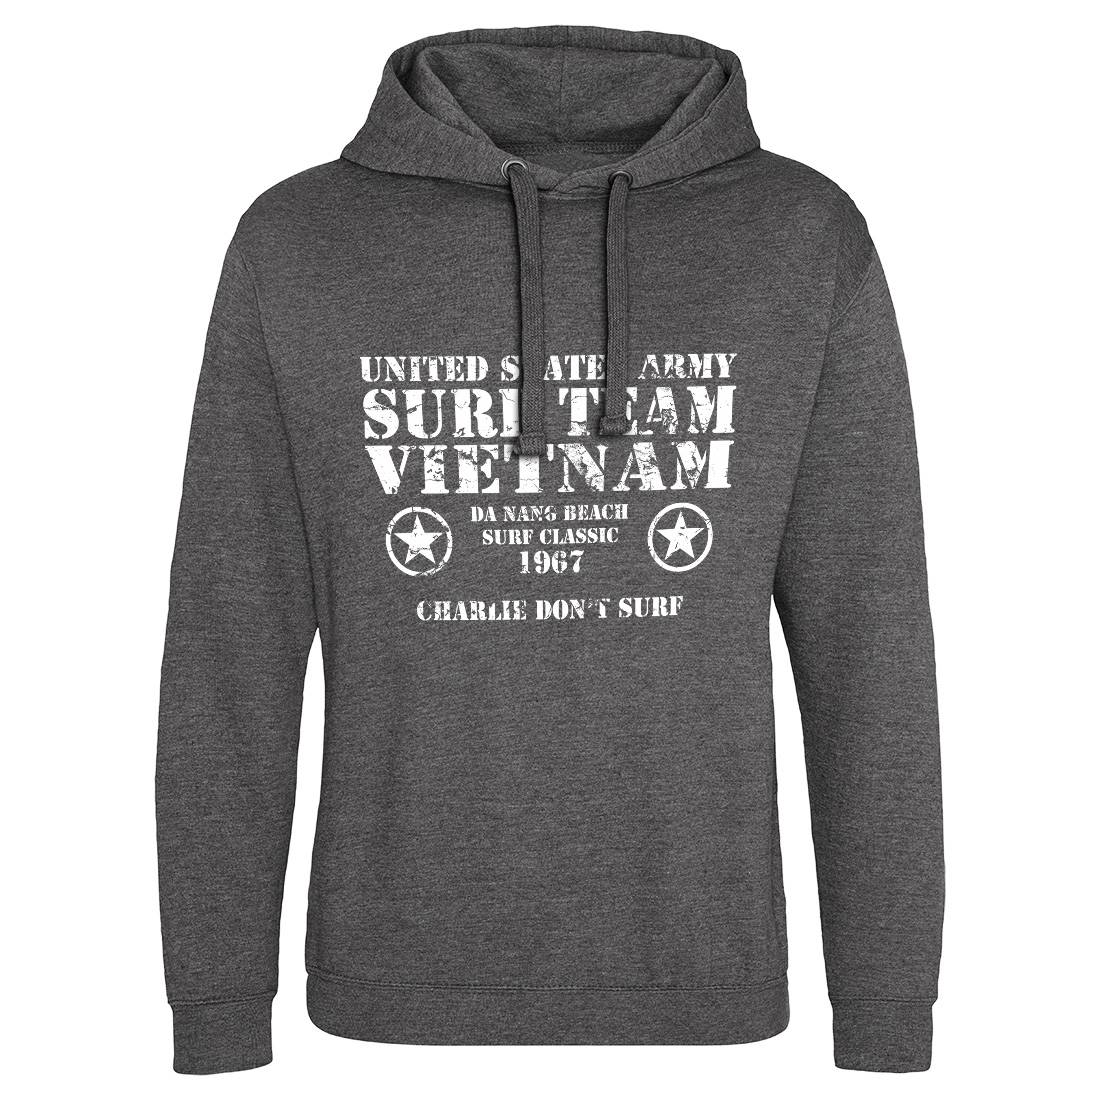 Surf Team Vietnam Mens Hoodie Without Pocket Army D438